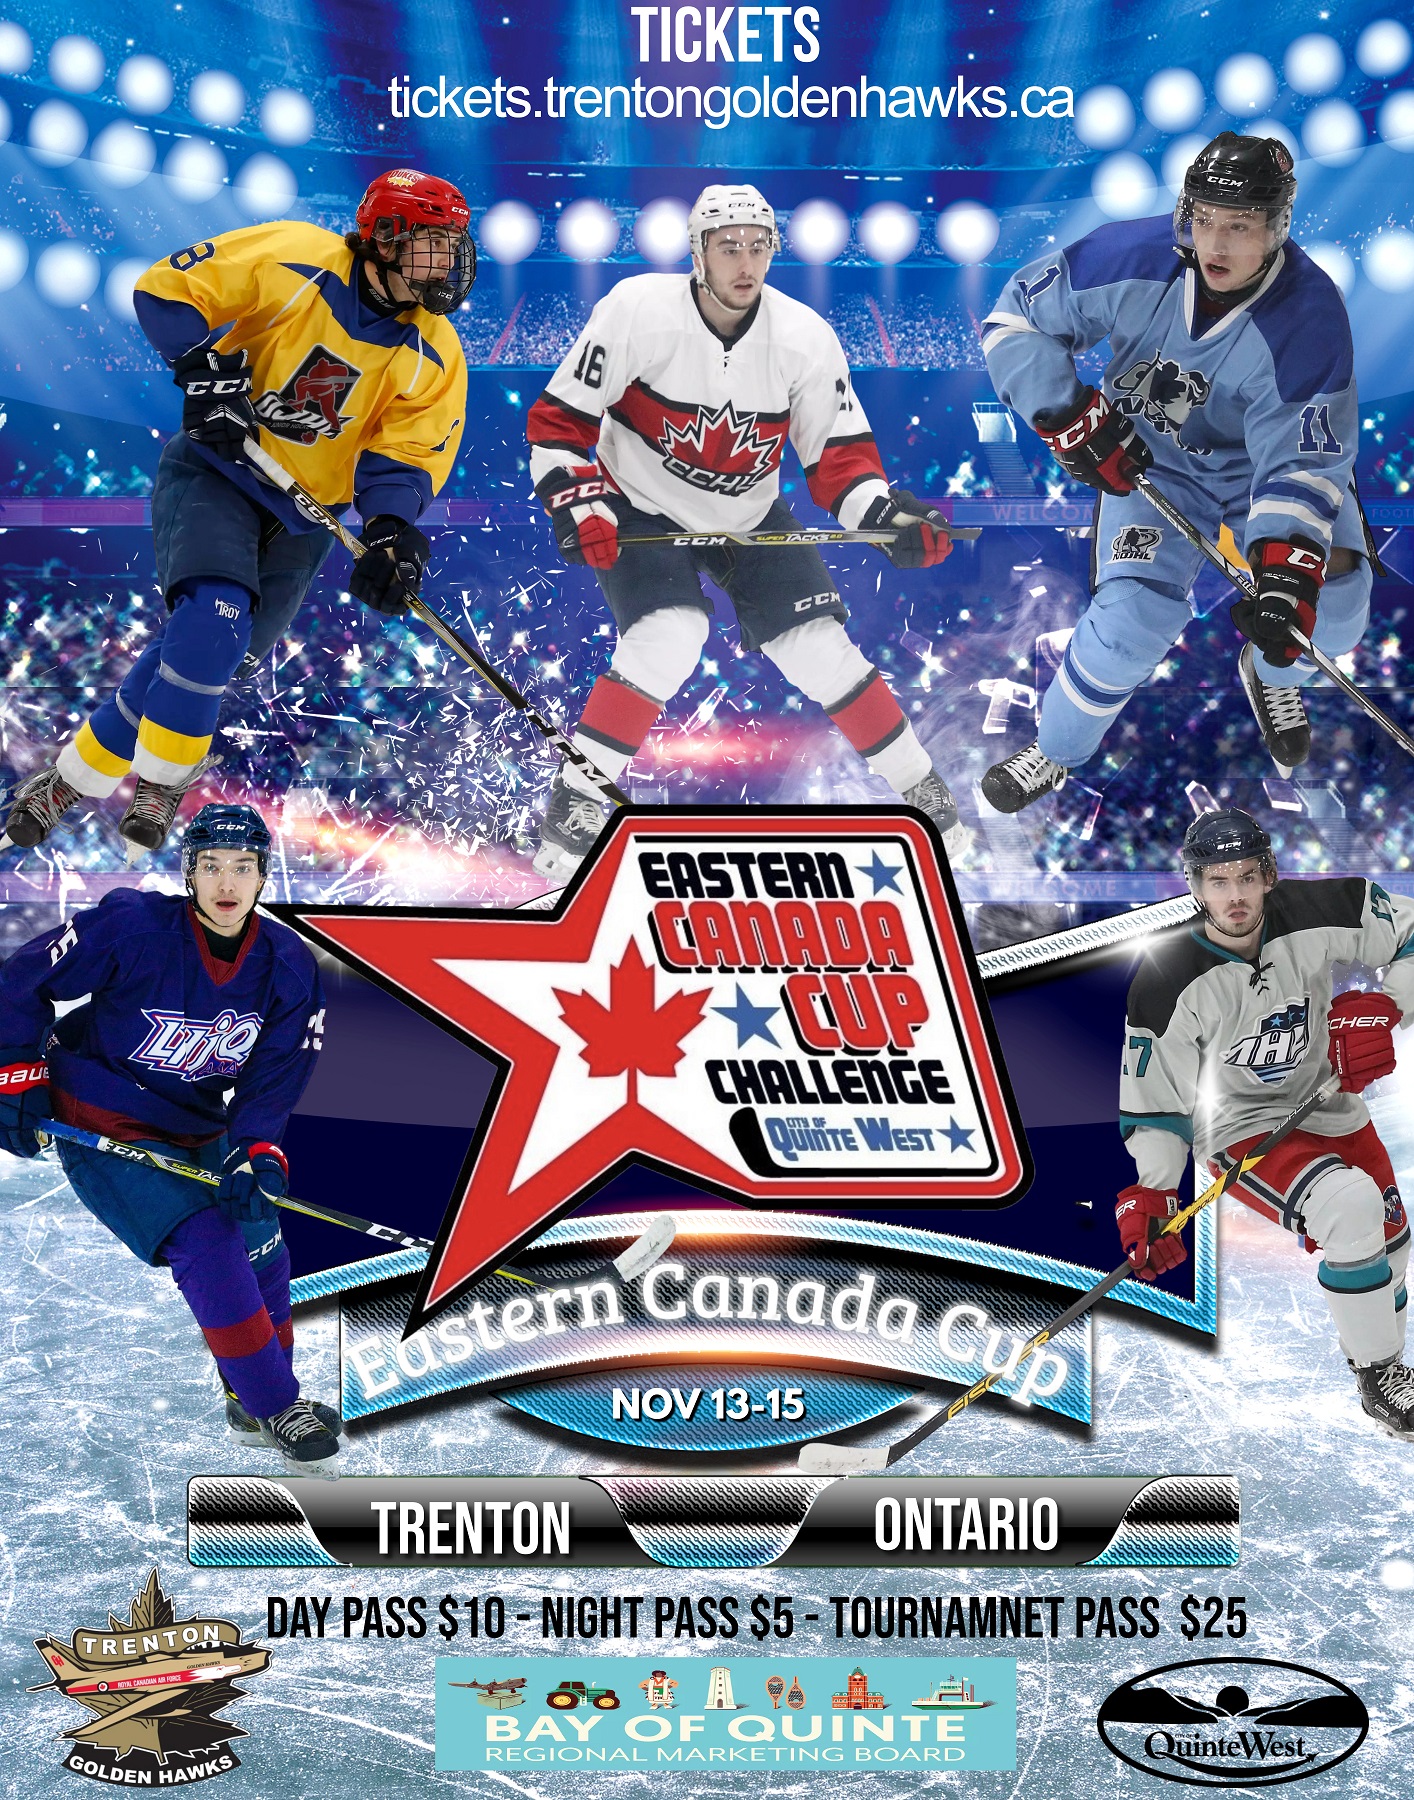 Tickets on sale for Eastern Canada Cup in Trenton, Ont.